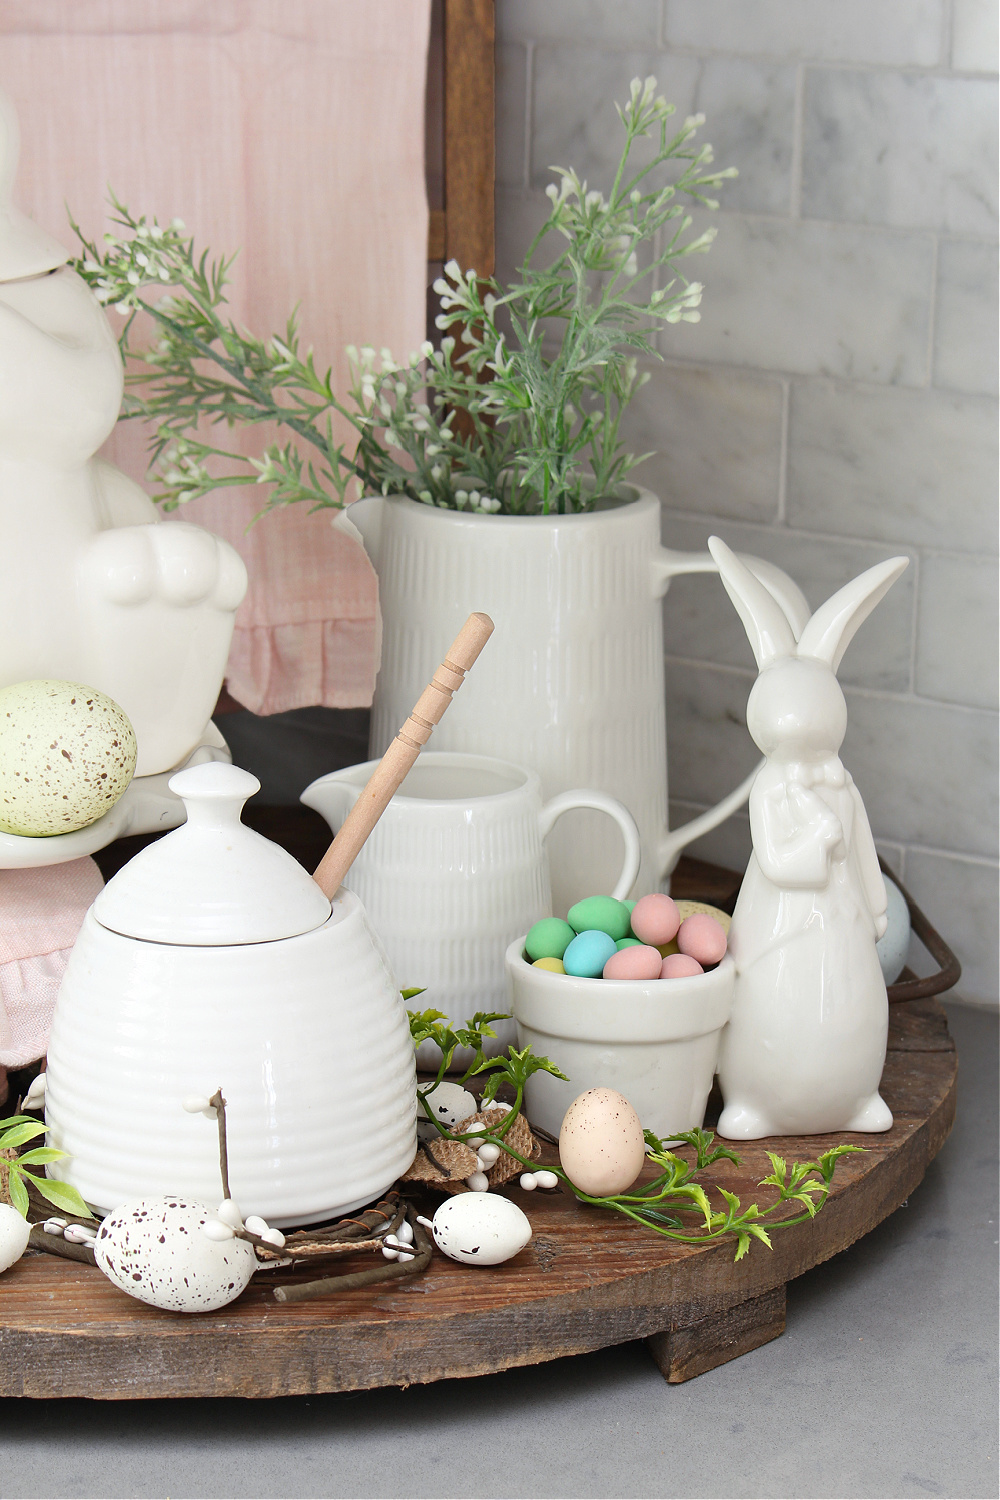 Simple Easter bunny bowl with mini eggs in a spring kitchen vignette.